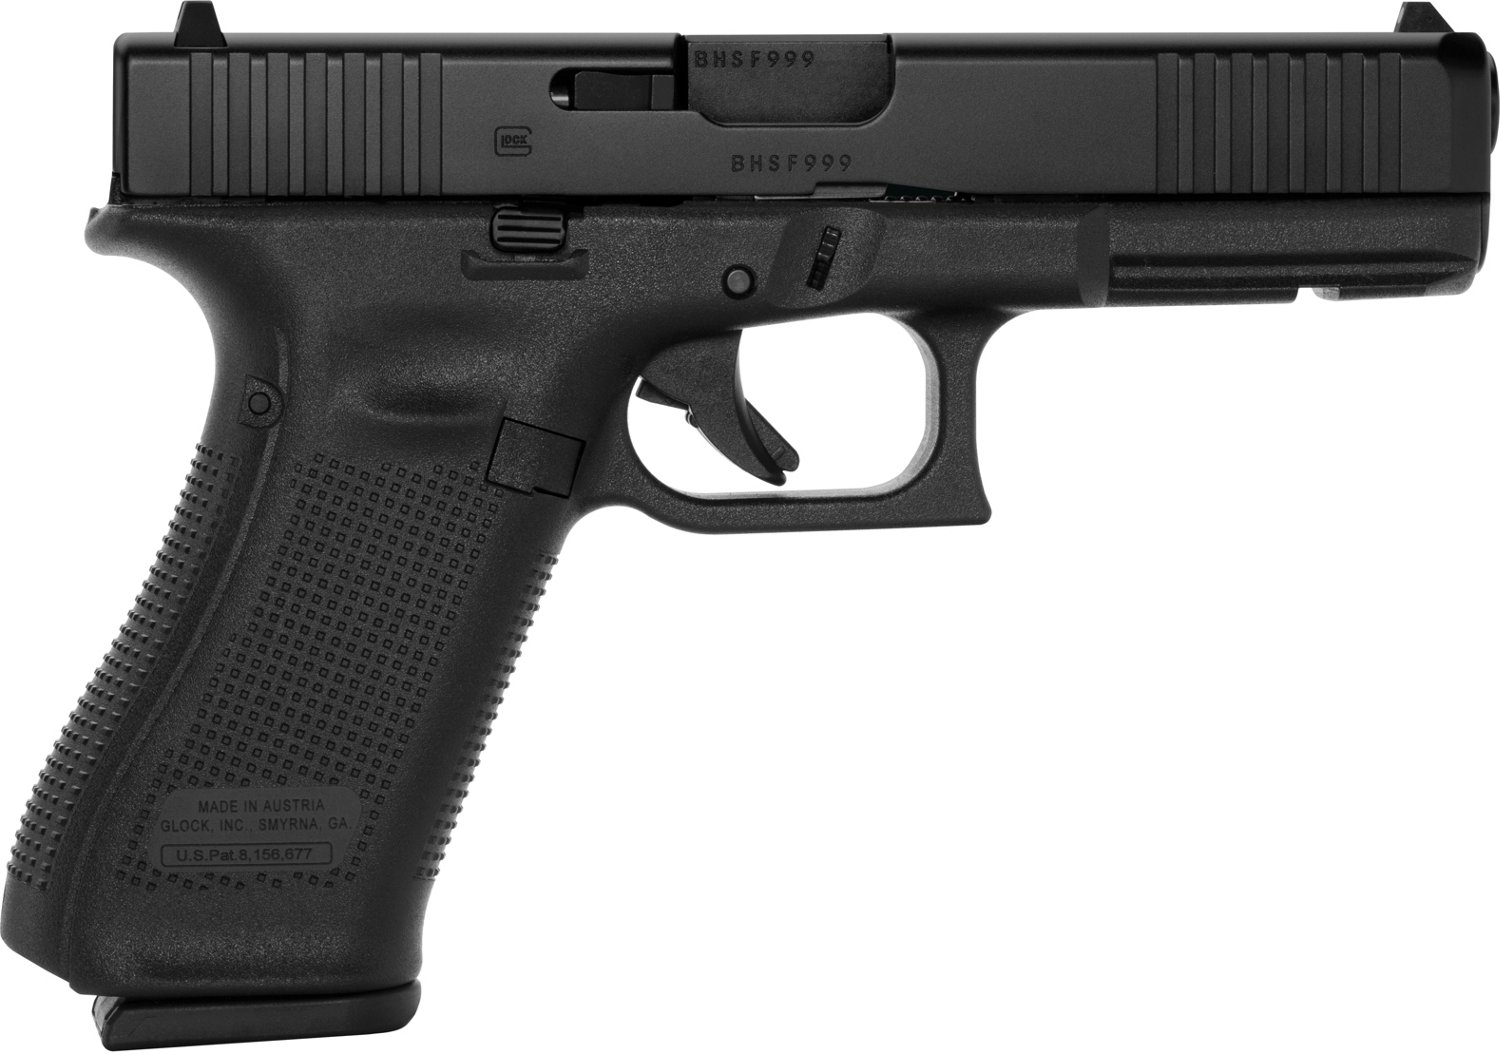 GLOCK 17 - G17 9mm Semiautomatic Pistol                                                                                          - view number 1 selected